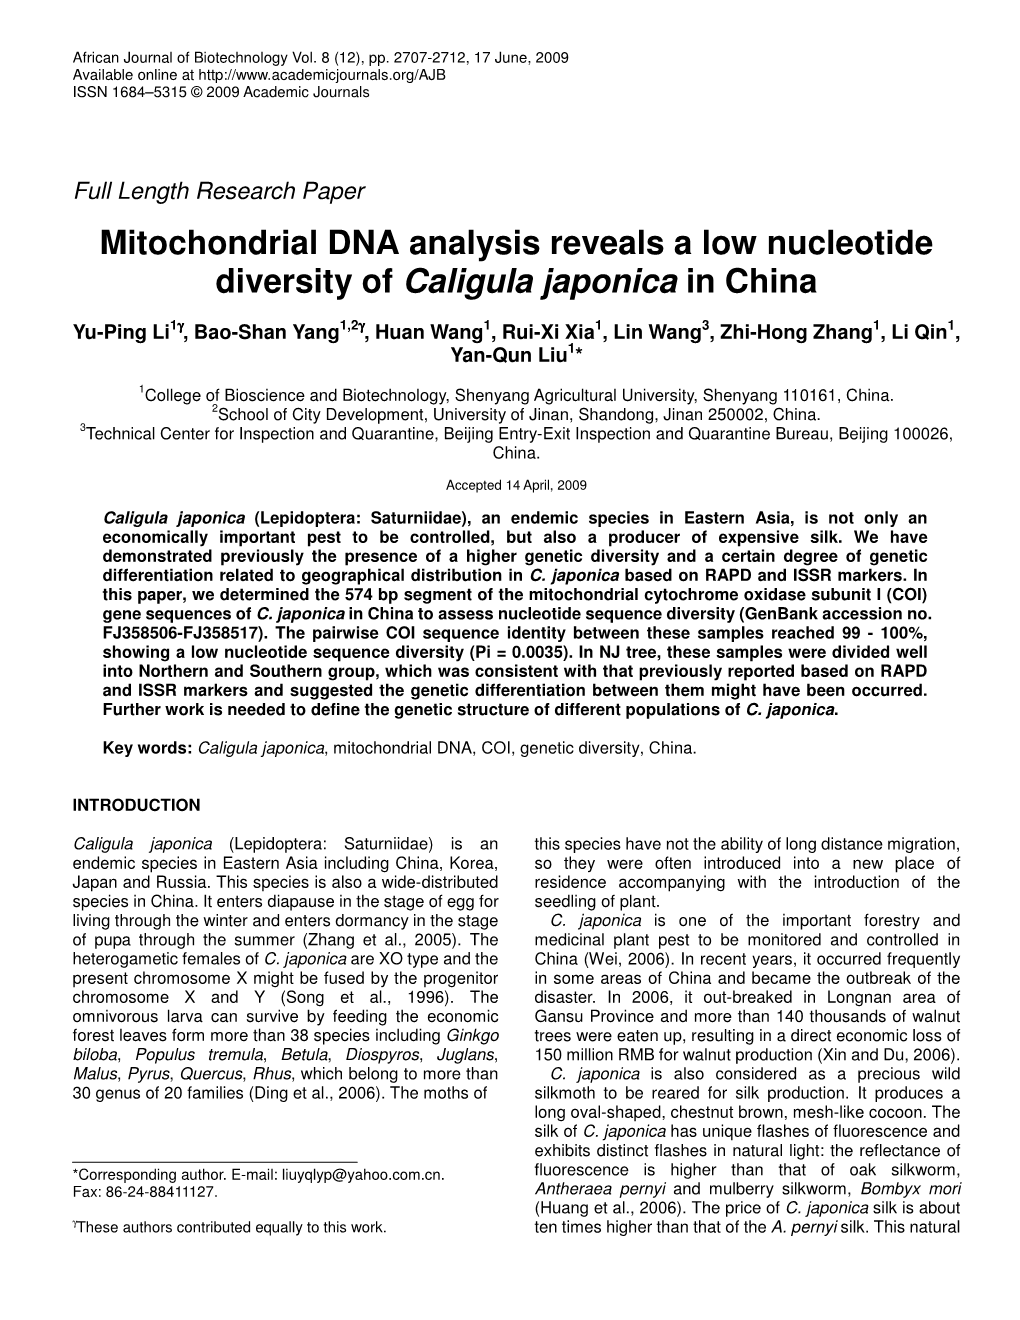 Mitochondrial DNA Analysis Reveals a Low Nucleotide Diversity of Caligula Japonica in China